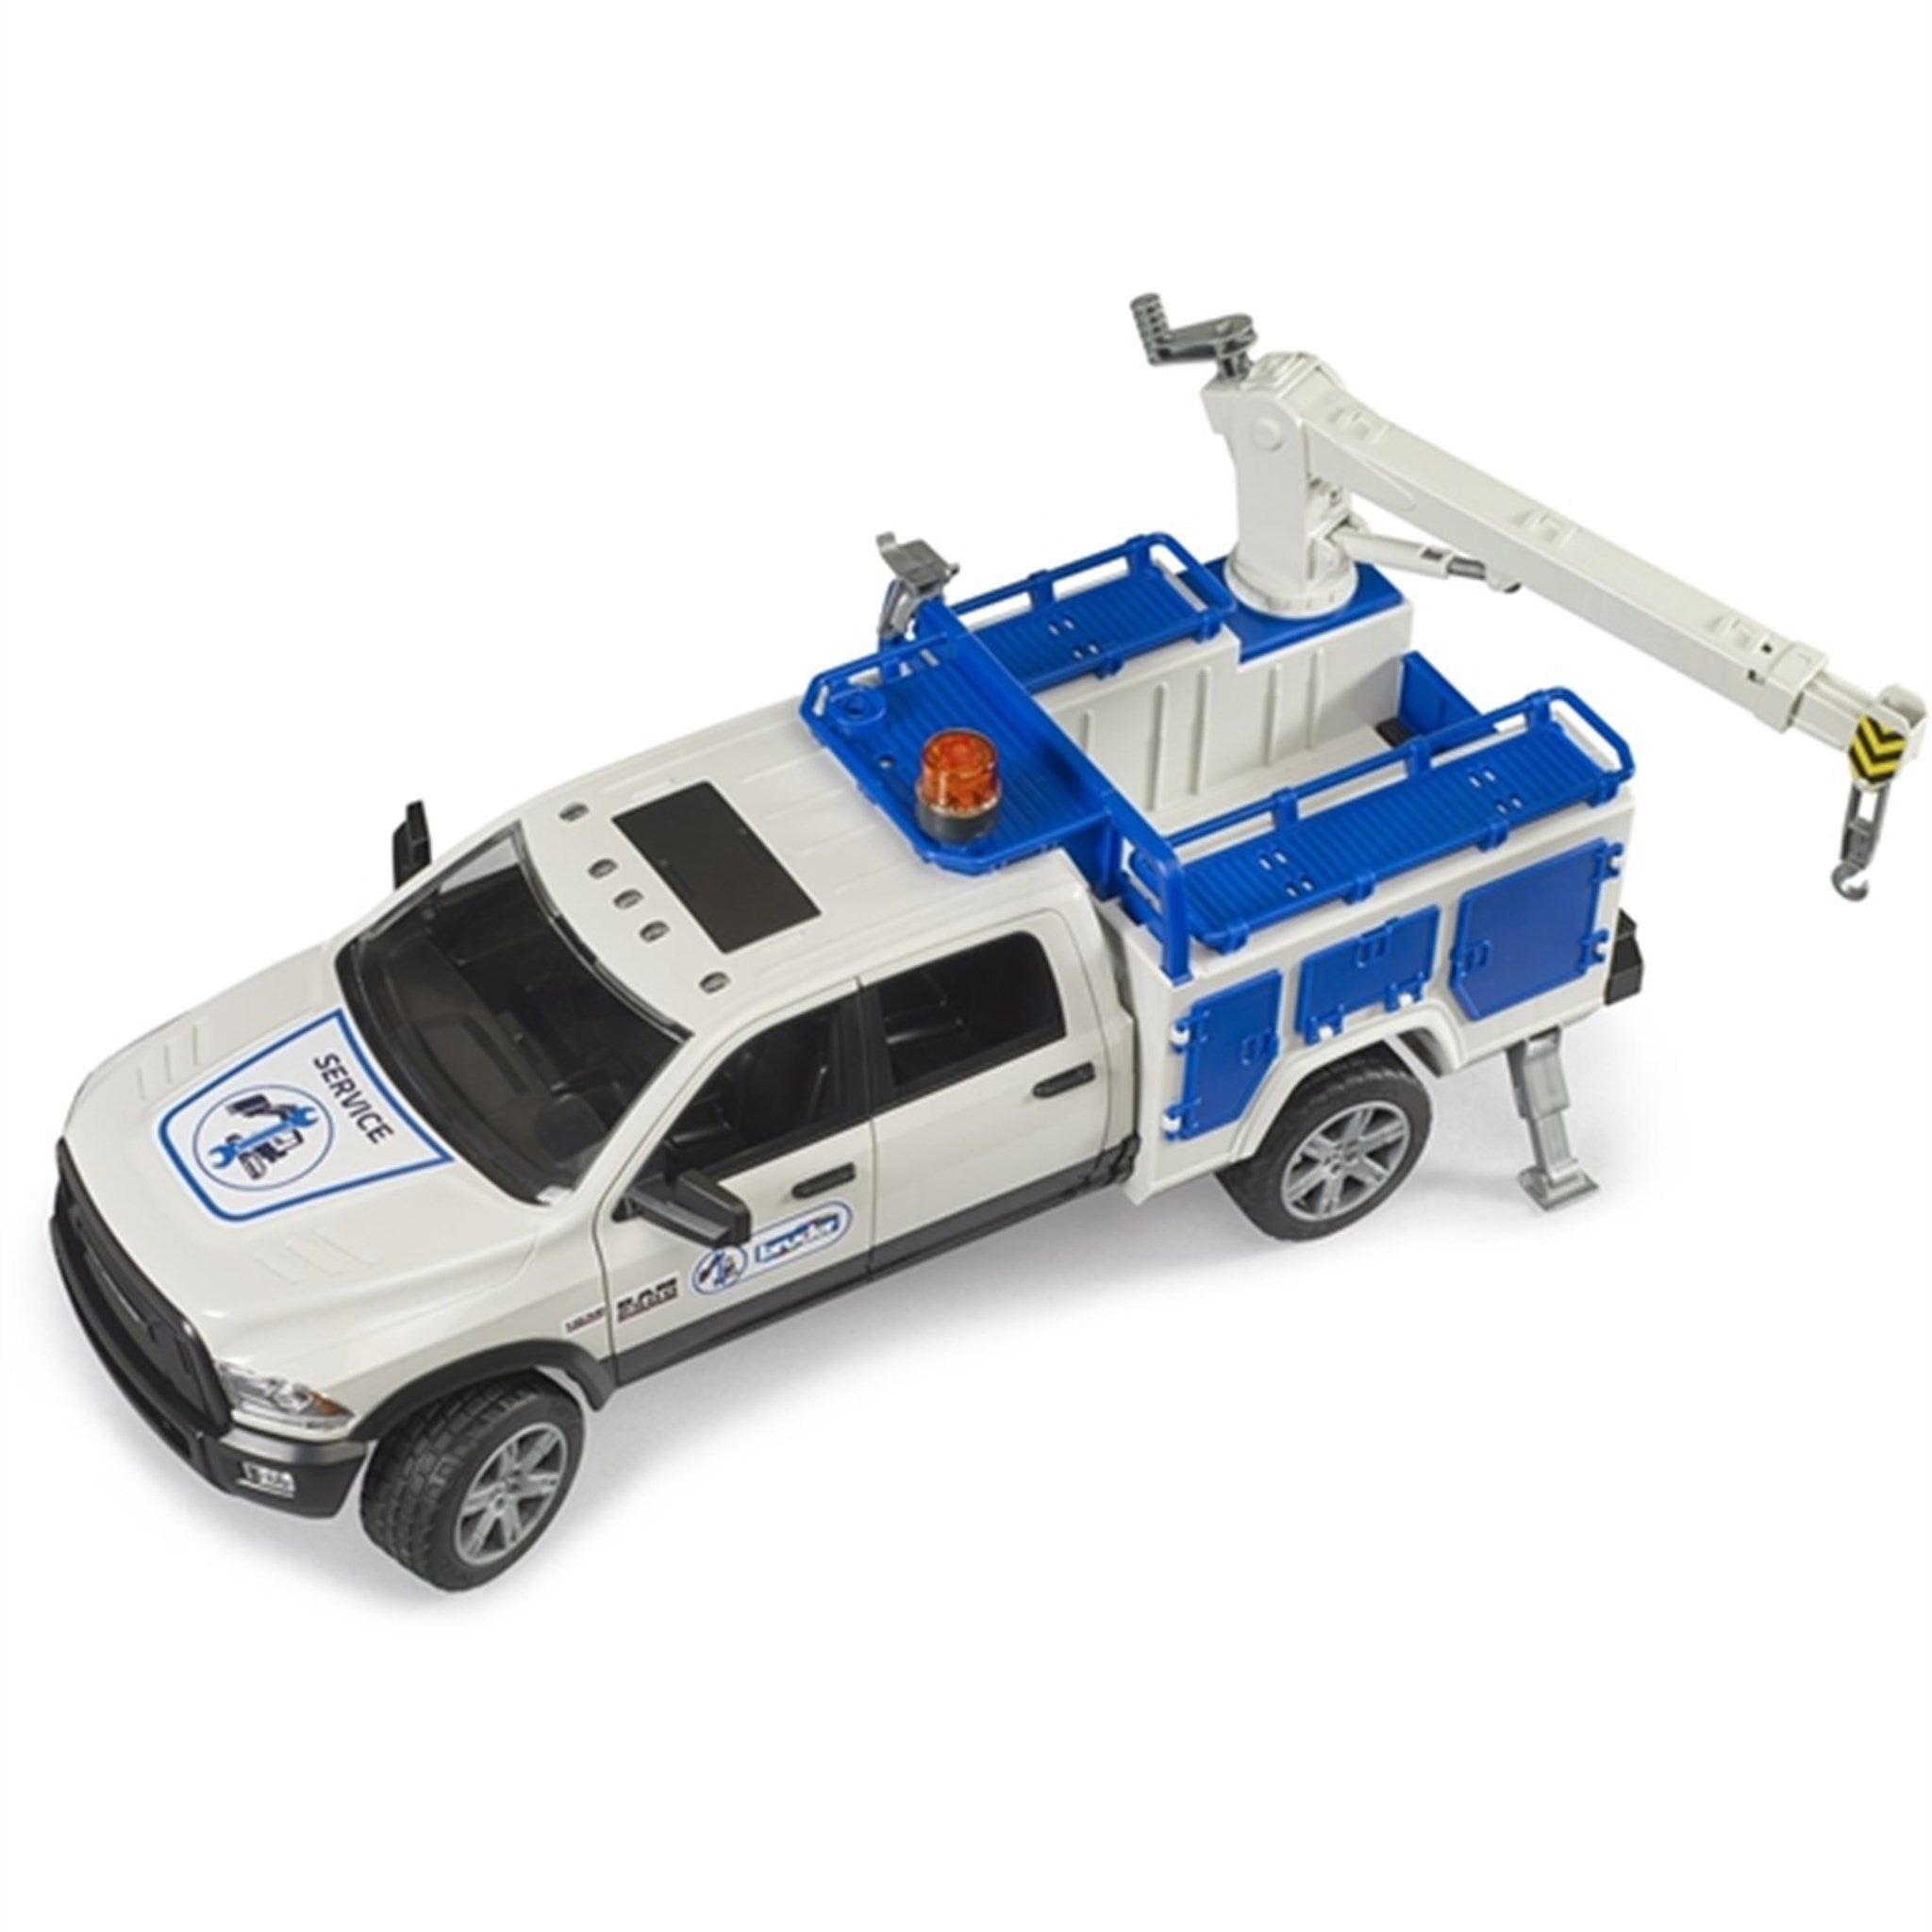 Bruder RAM 2500 Service Truck with Rotating Beacon Light 3